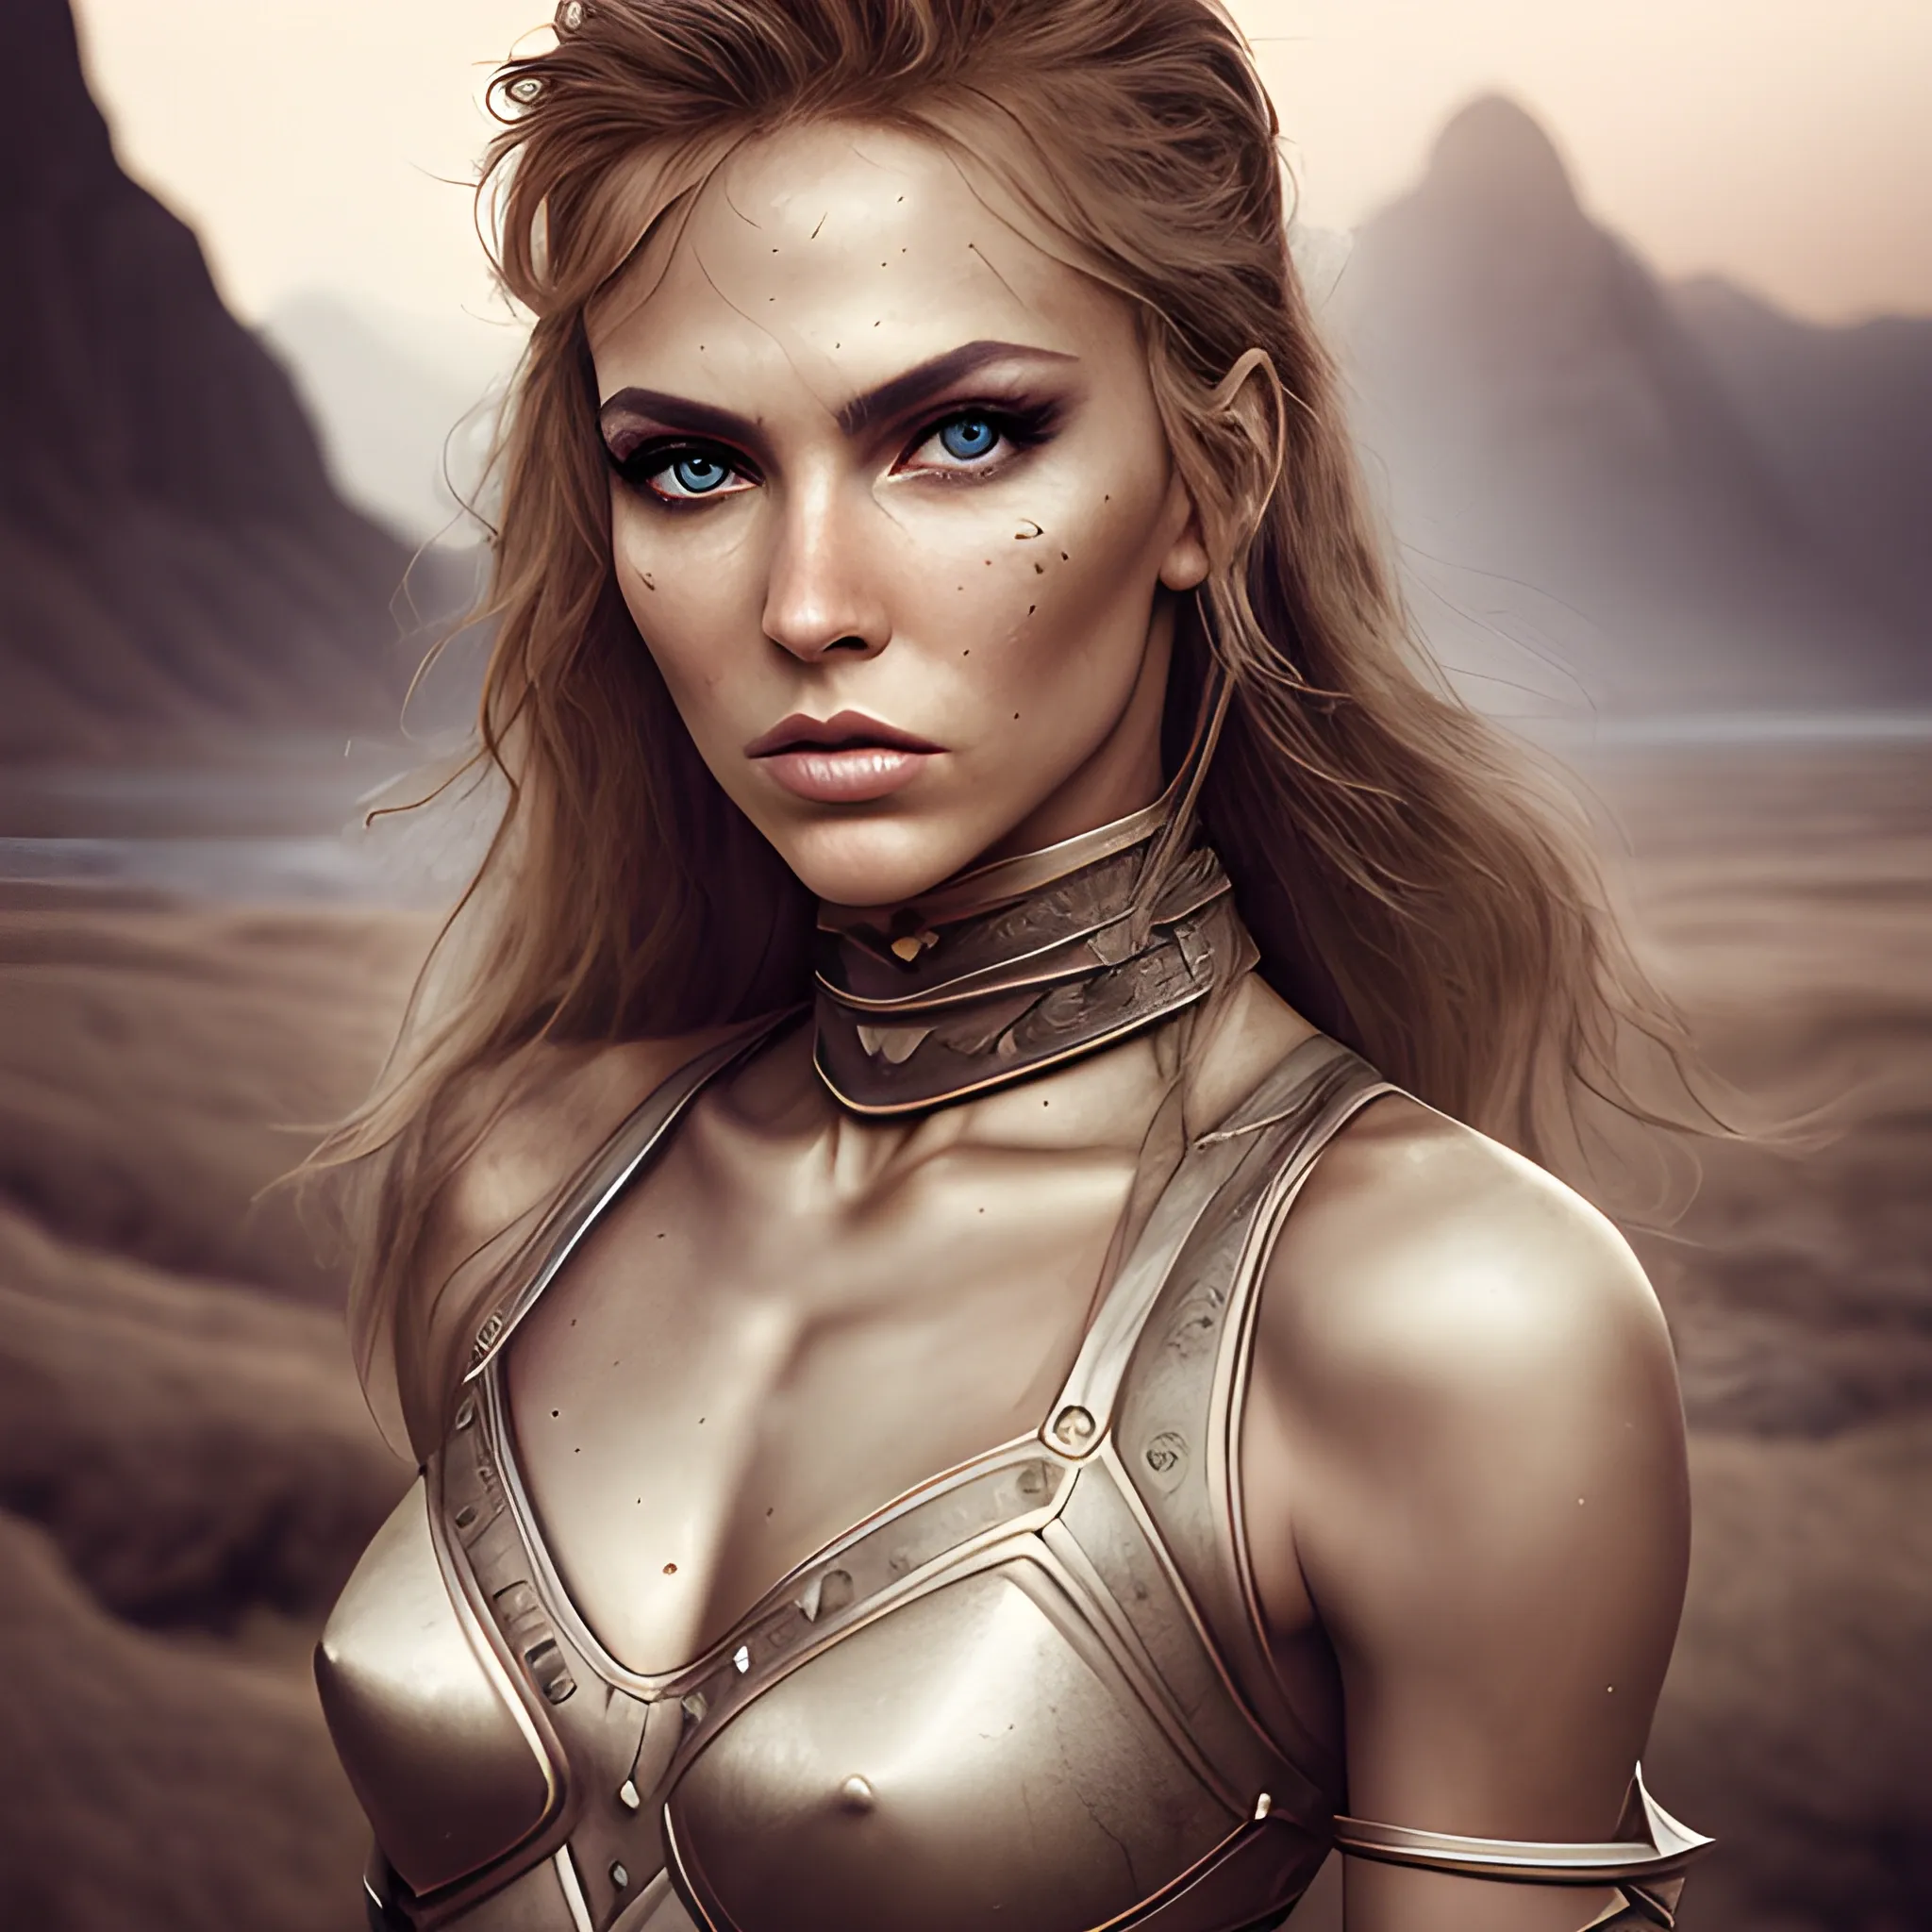 Slim, Star Warrior, perky, feminine, smoldering look, perfect composition, beautiful, sharp focus, hyperdetailed, naturalistic photograph, by a famous landscape photographer